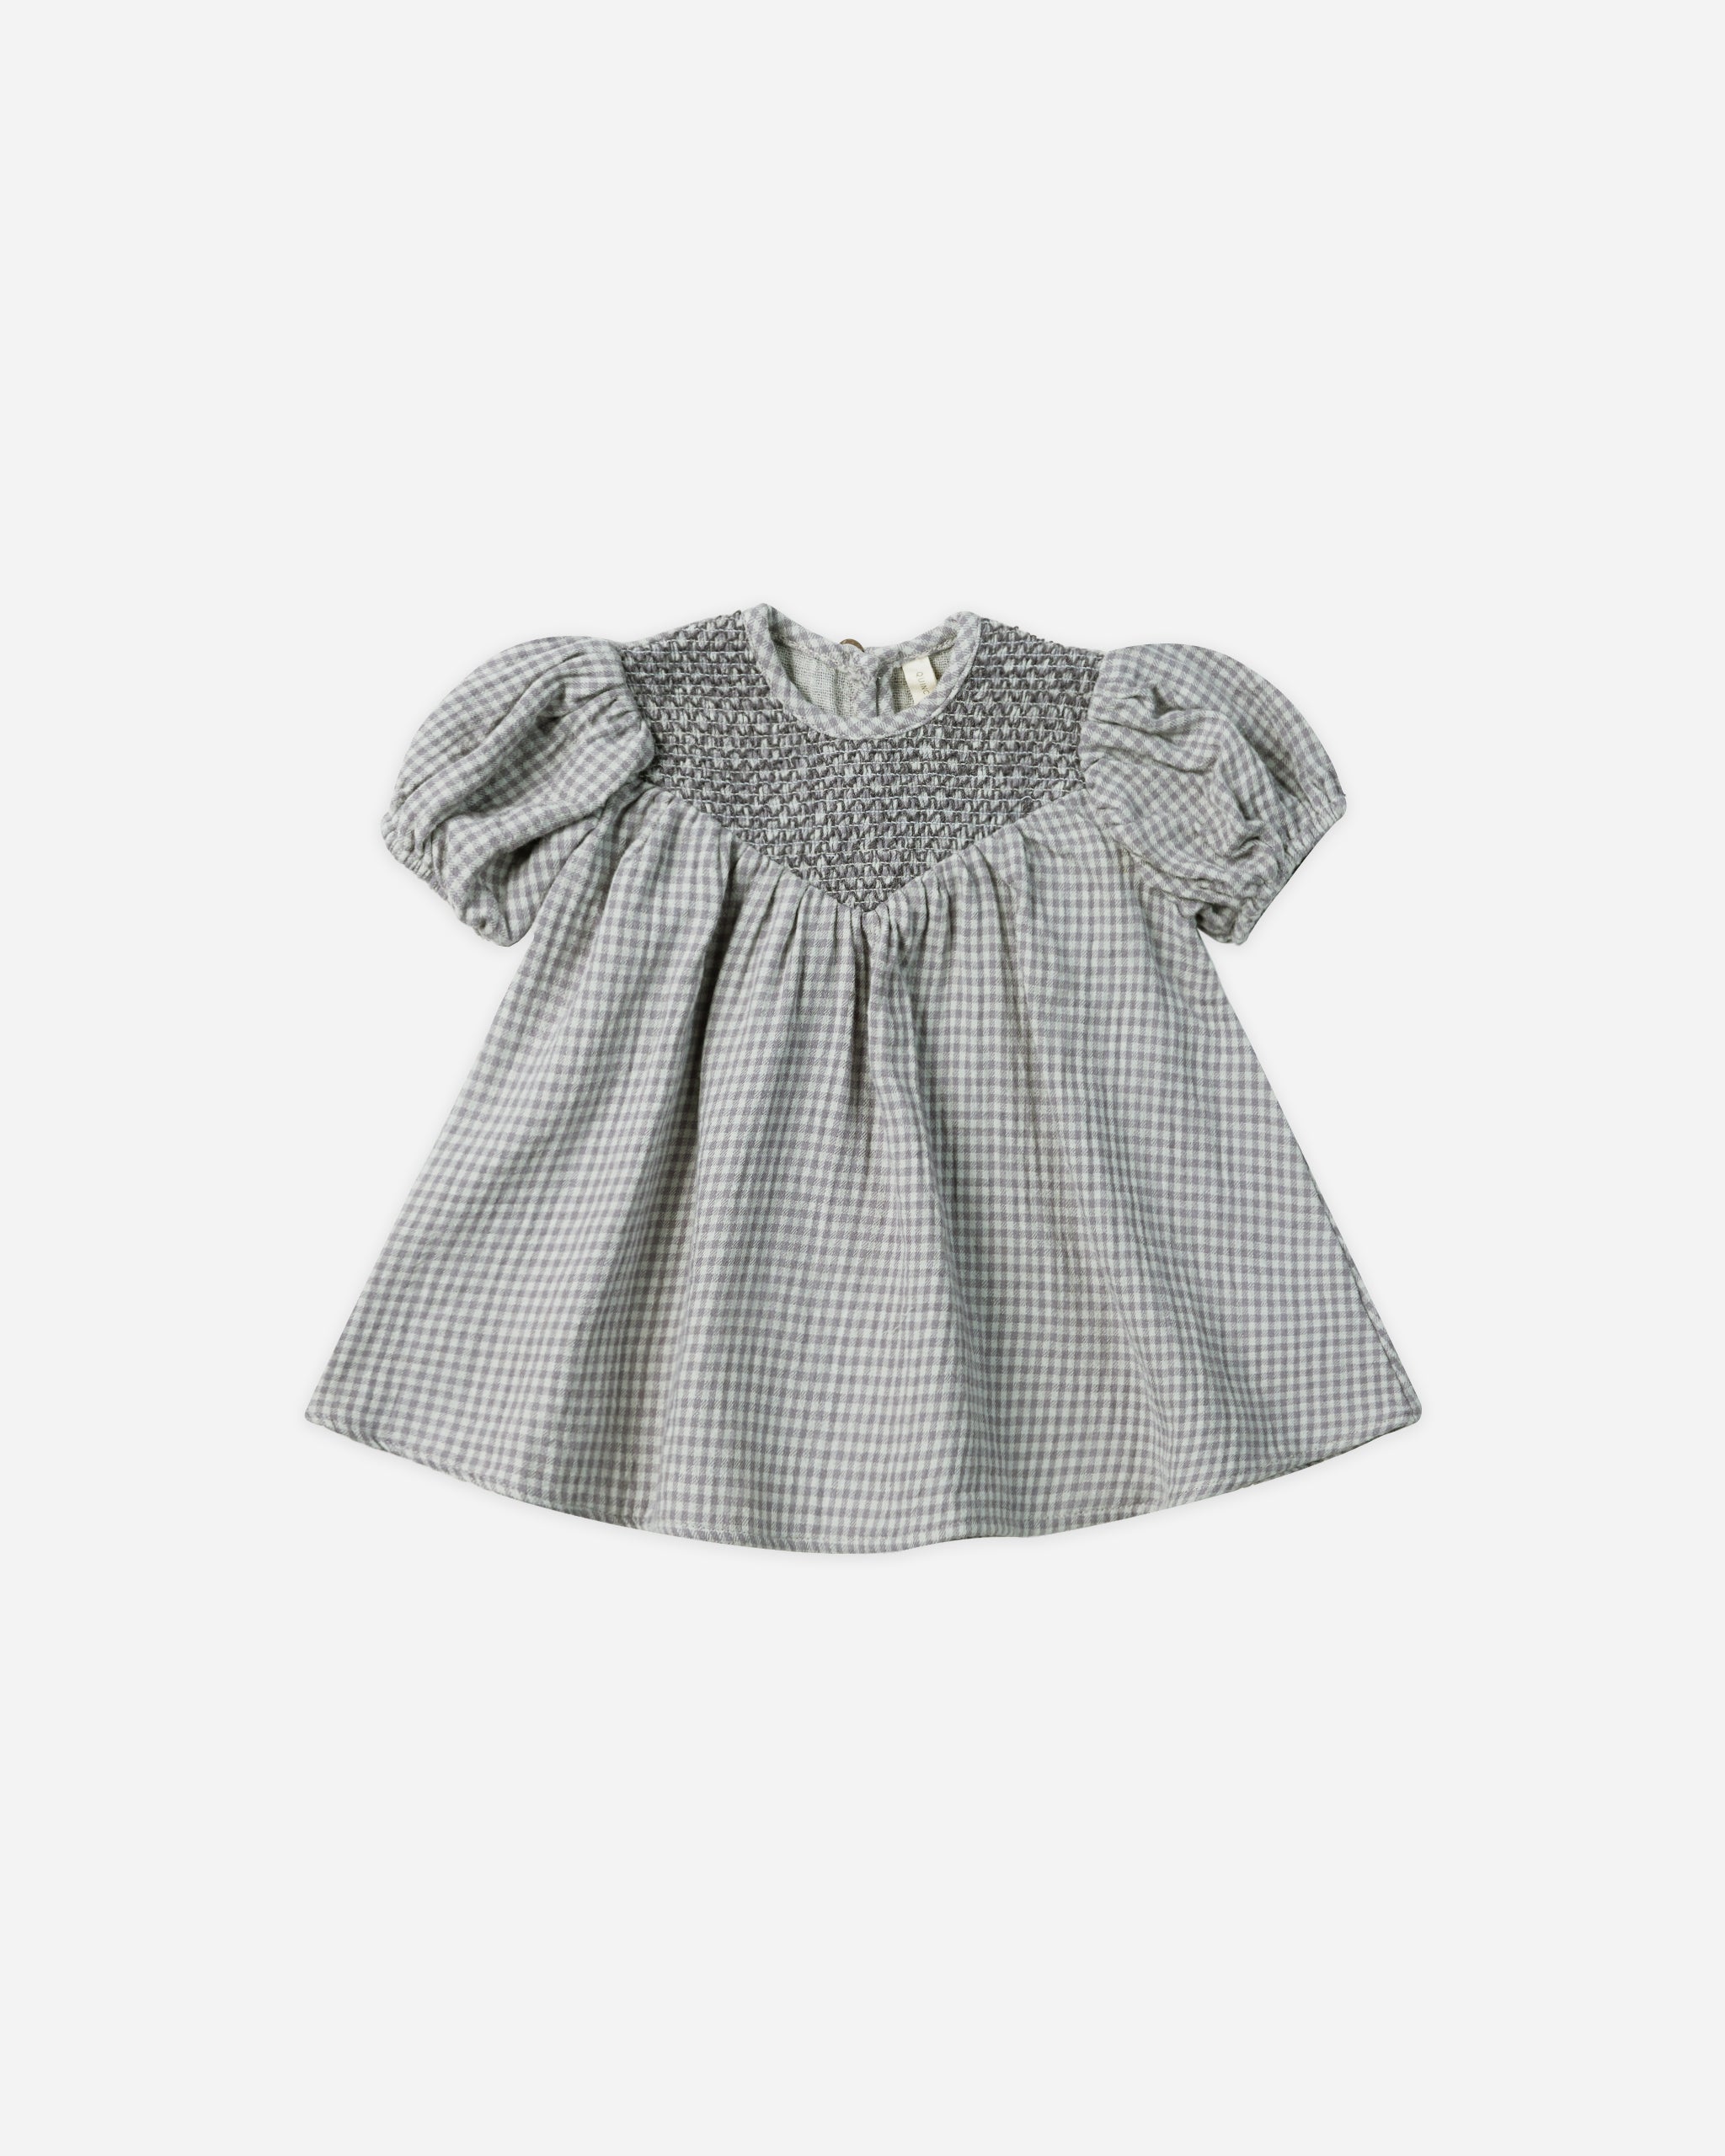 Carina Dress || Blue Gingham - Rylee + Cru | Kids Clothes | Trendy Baby Clothes | Modern Infant Outfits |